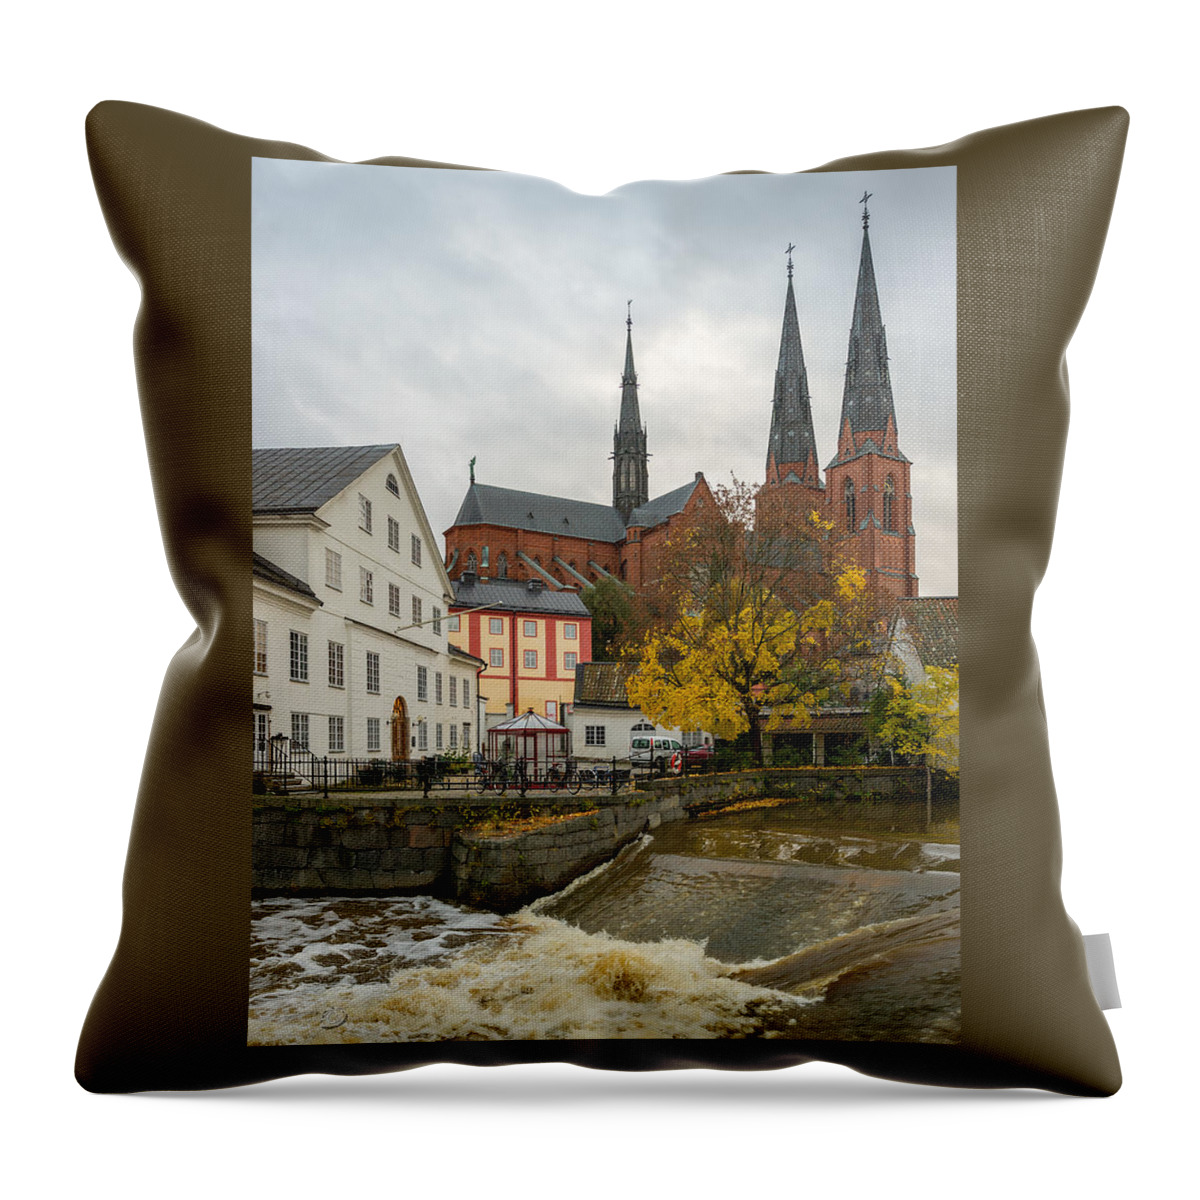 Academy Mill Waterfall Throw Pillow featuring the photograph Academy Mill Waterfall by Torbjorn Swenelius